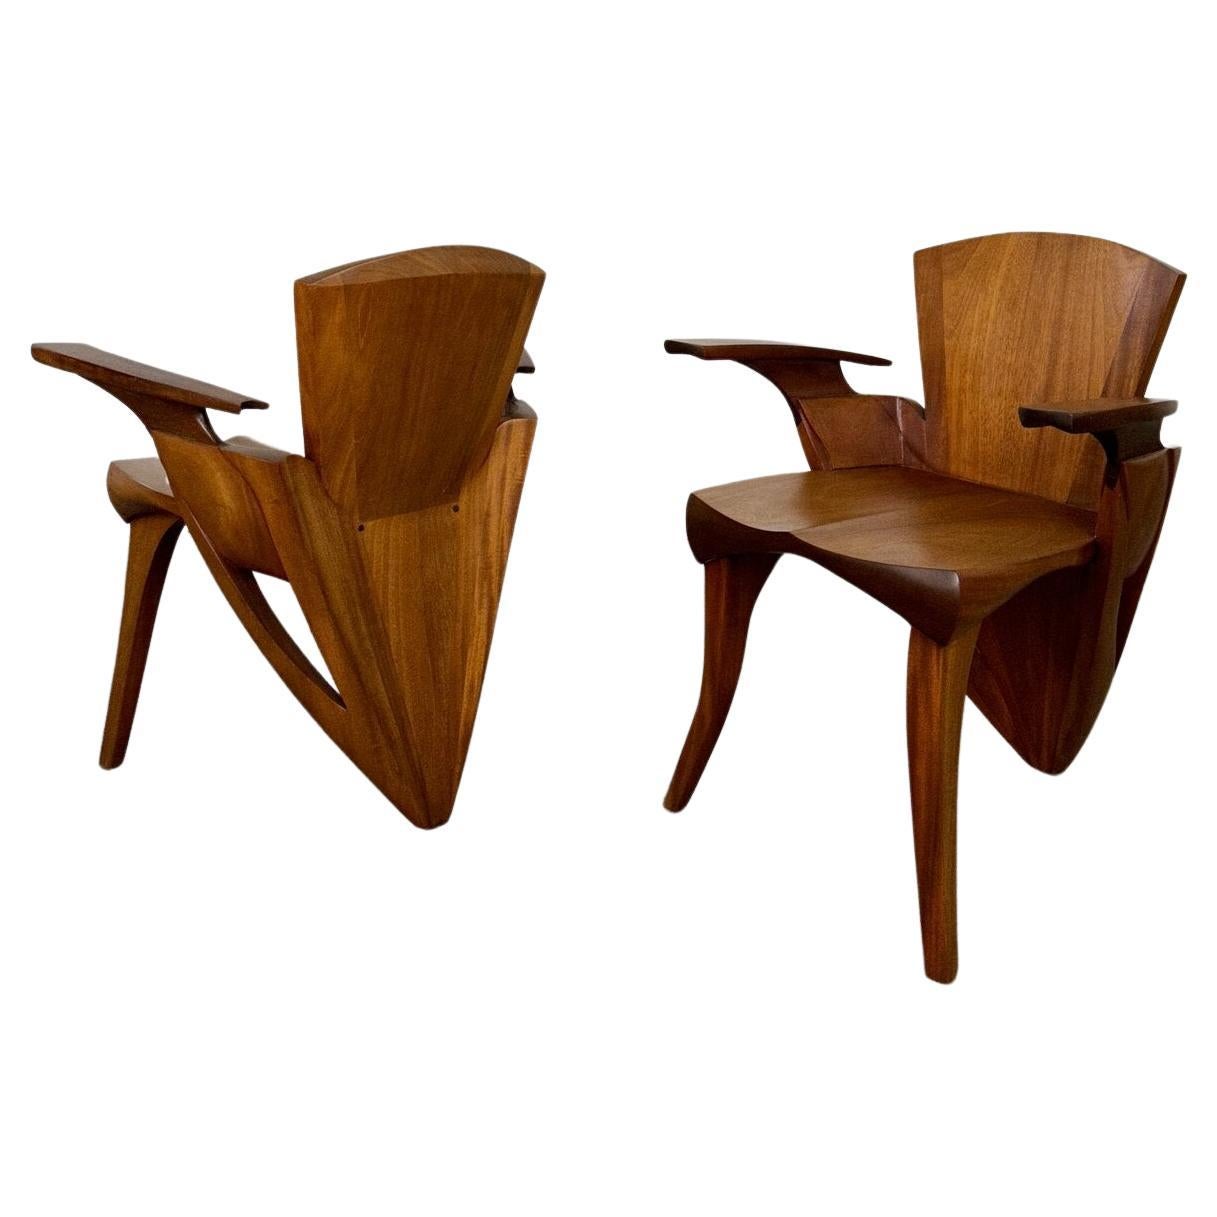 Studio handcrafted Side chairs -pair For Sale